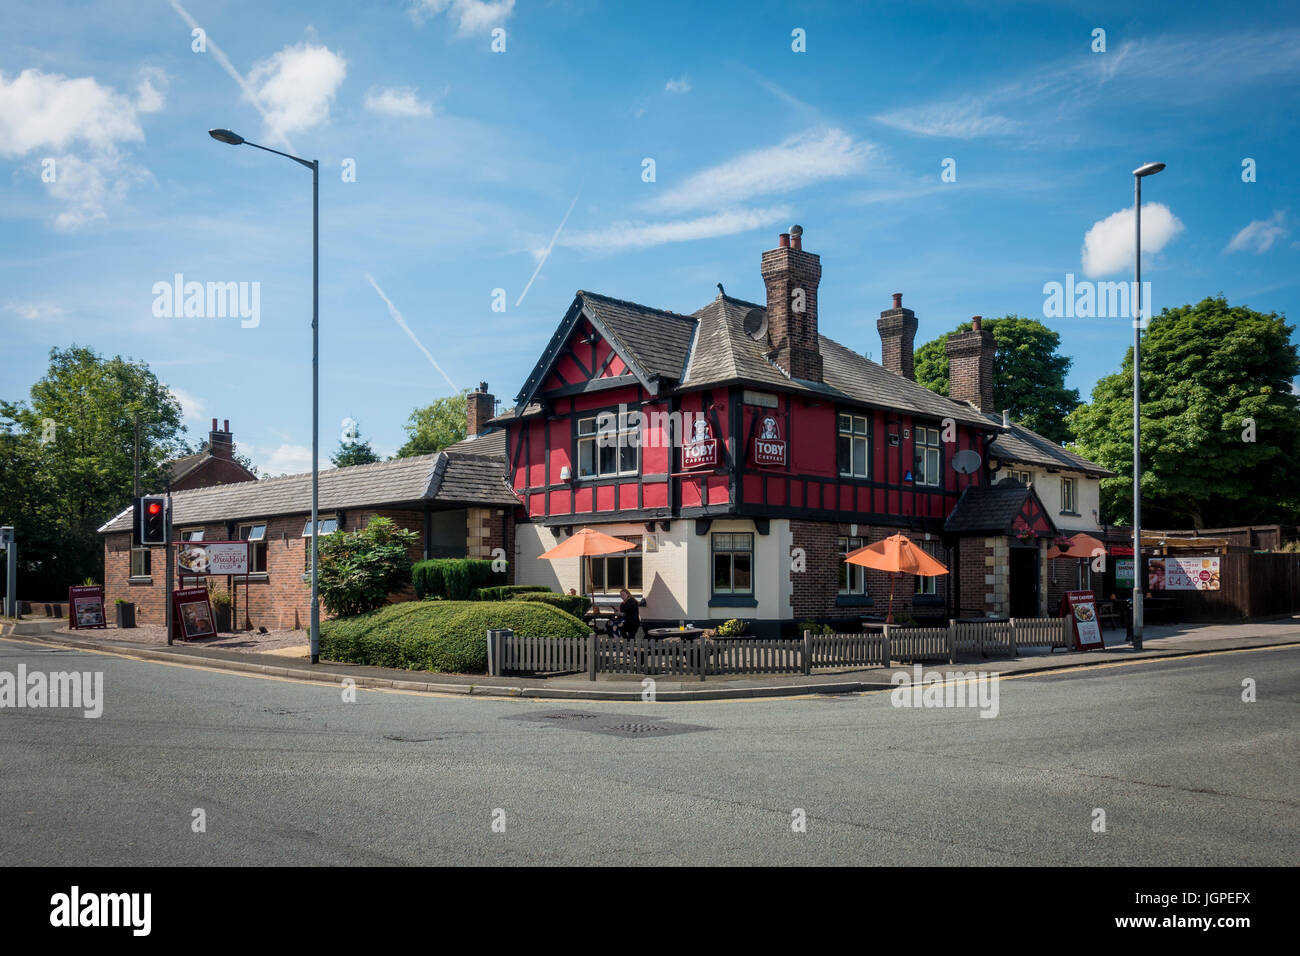 Ainsworth Arms Toby Carvey in Ainsworth, Radcliffe, Manchester. Stock Photo